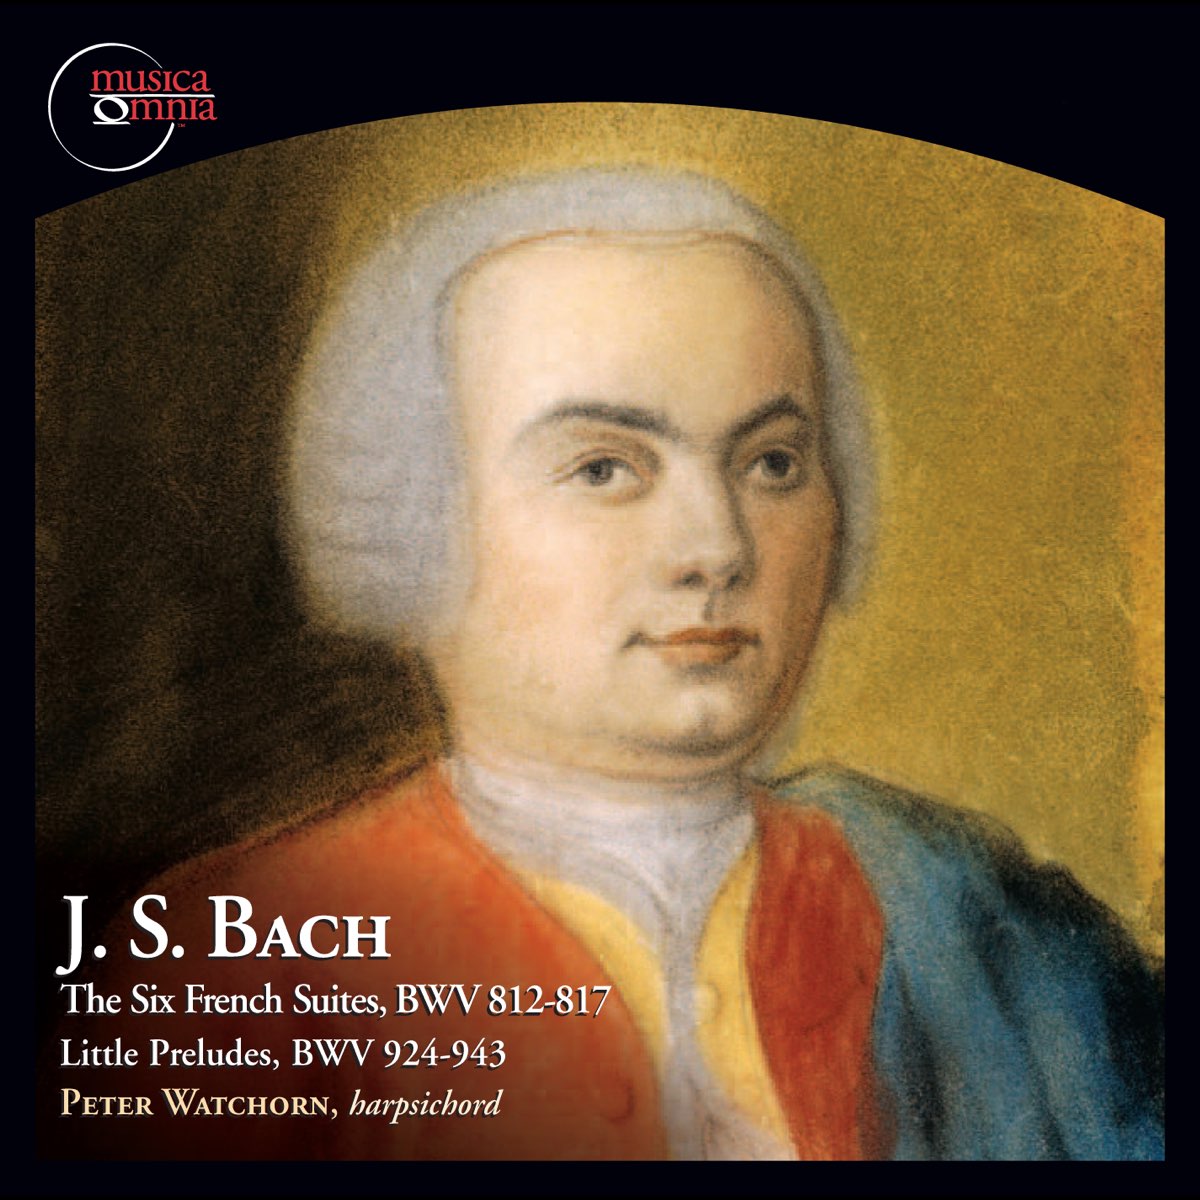 ‎Bach: The 6 French Suites, BWV 812-817 & Little Preludes, BWV 924-943 ...